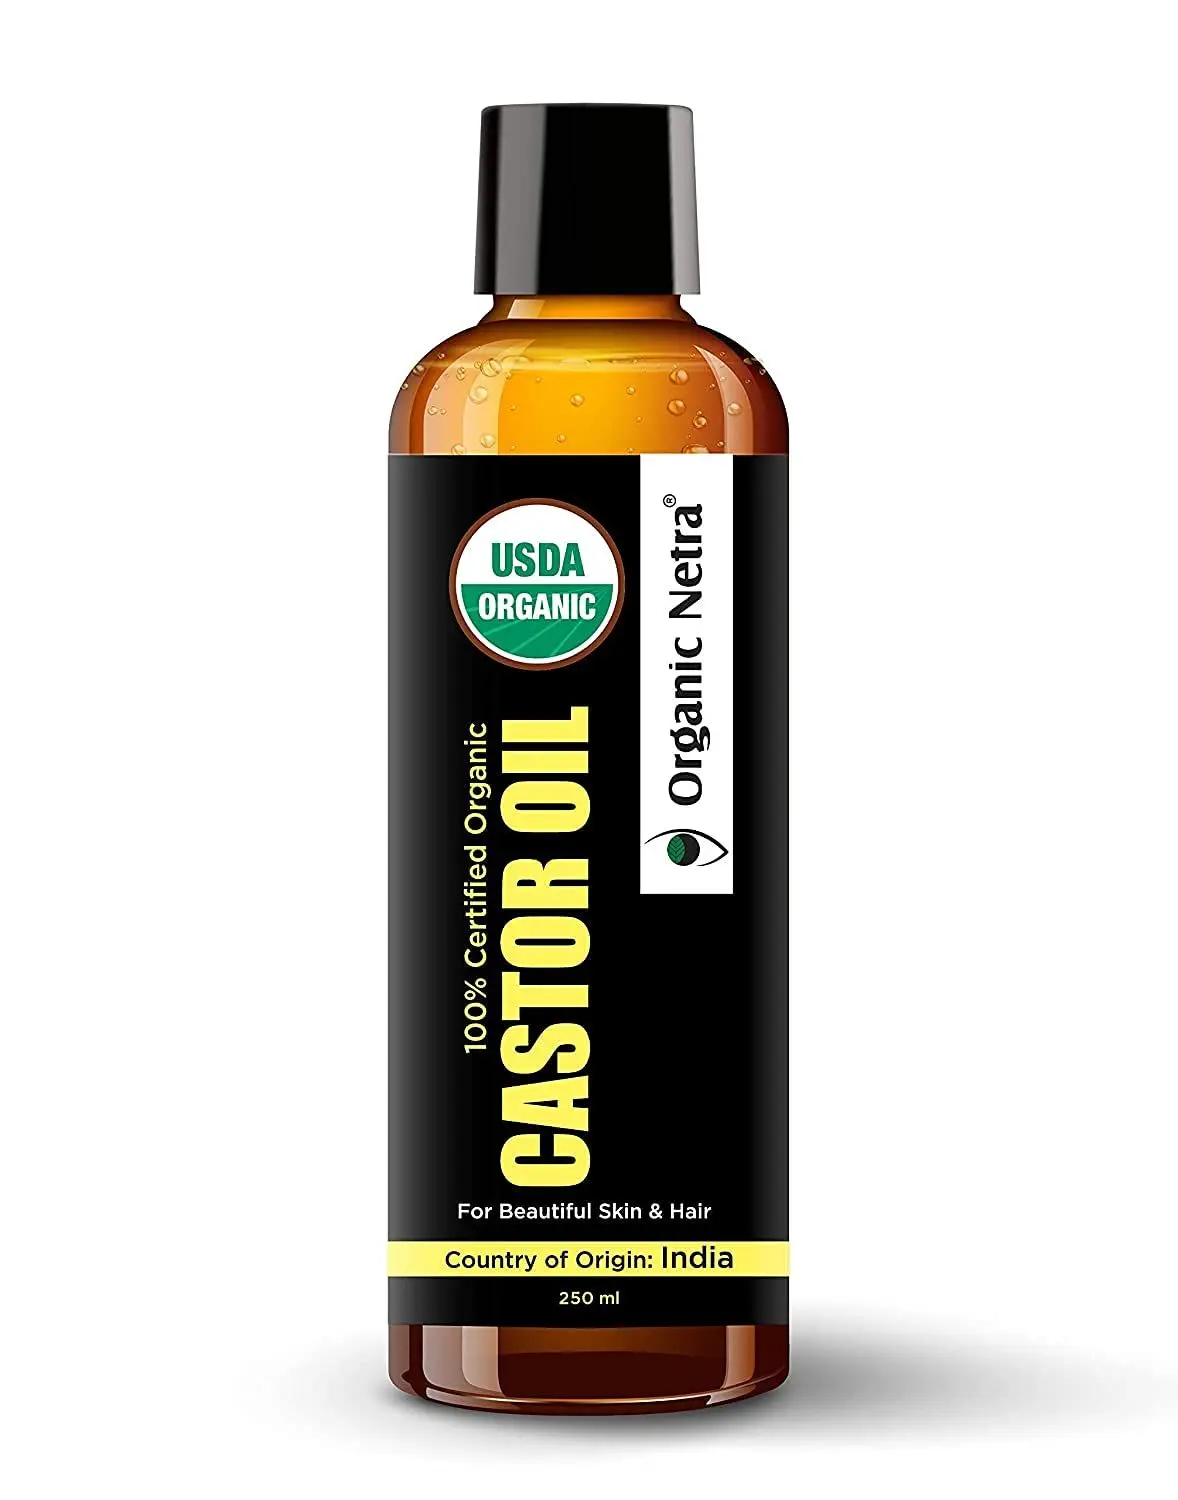 Organic Netra Castor Oil for Skin and Hair | Softening, Smoothening & Moisturizing Skin, Hair and Eyelashes | Repairs Splitends and Reduces Dandruff - 250ml (Pack of 1)